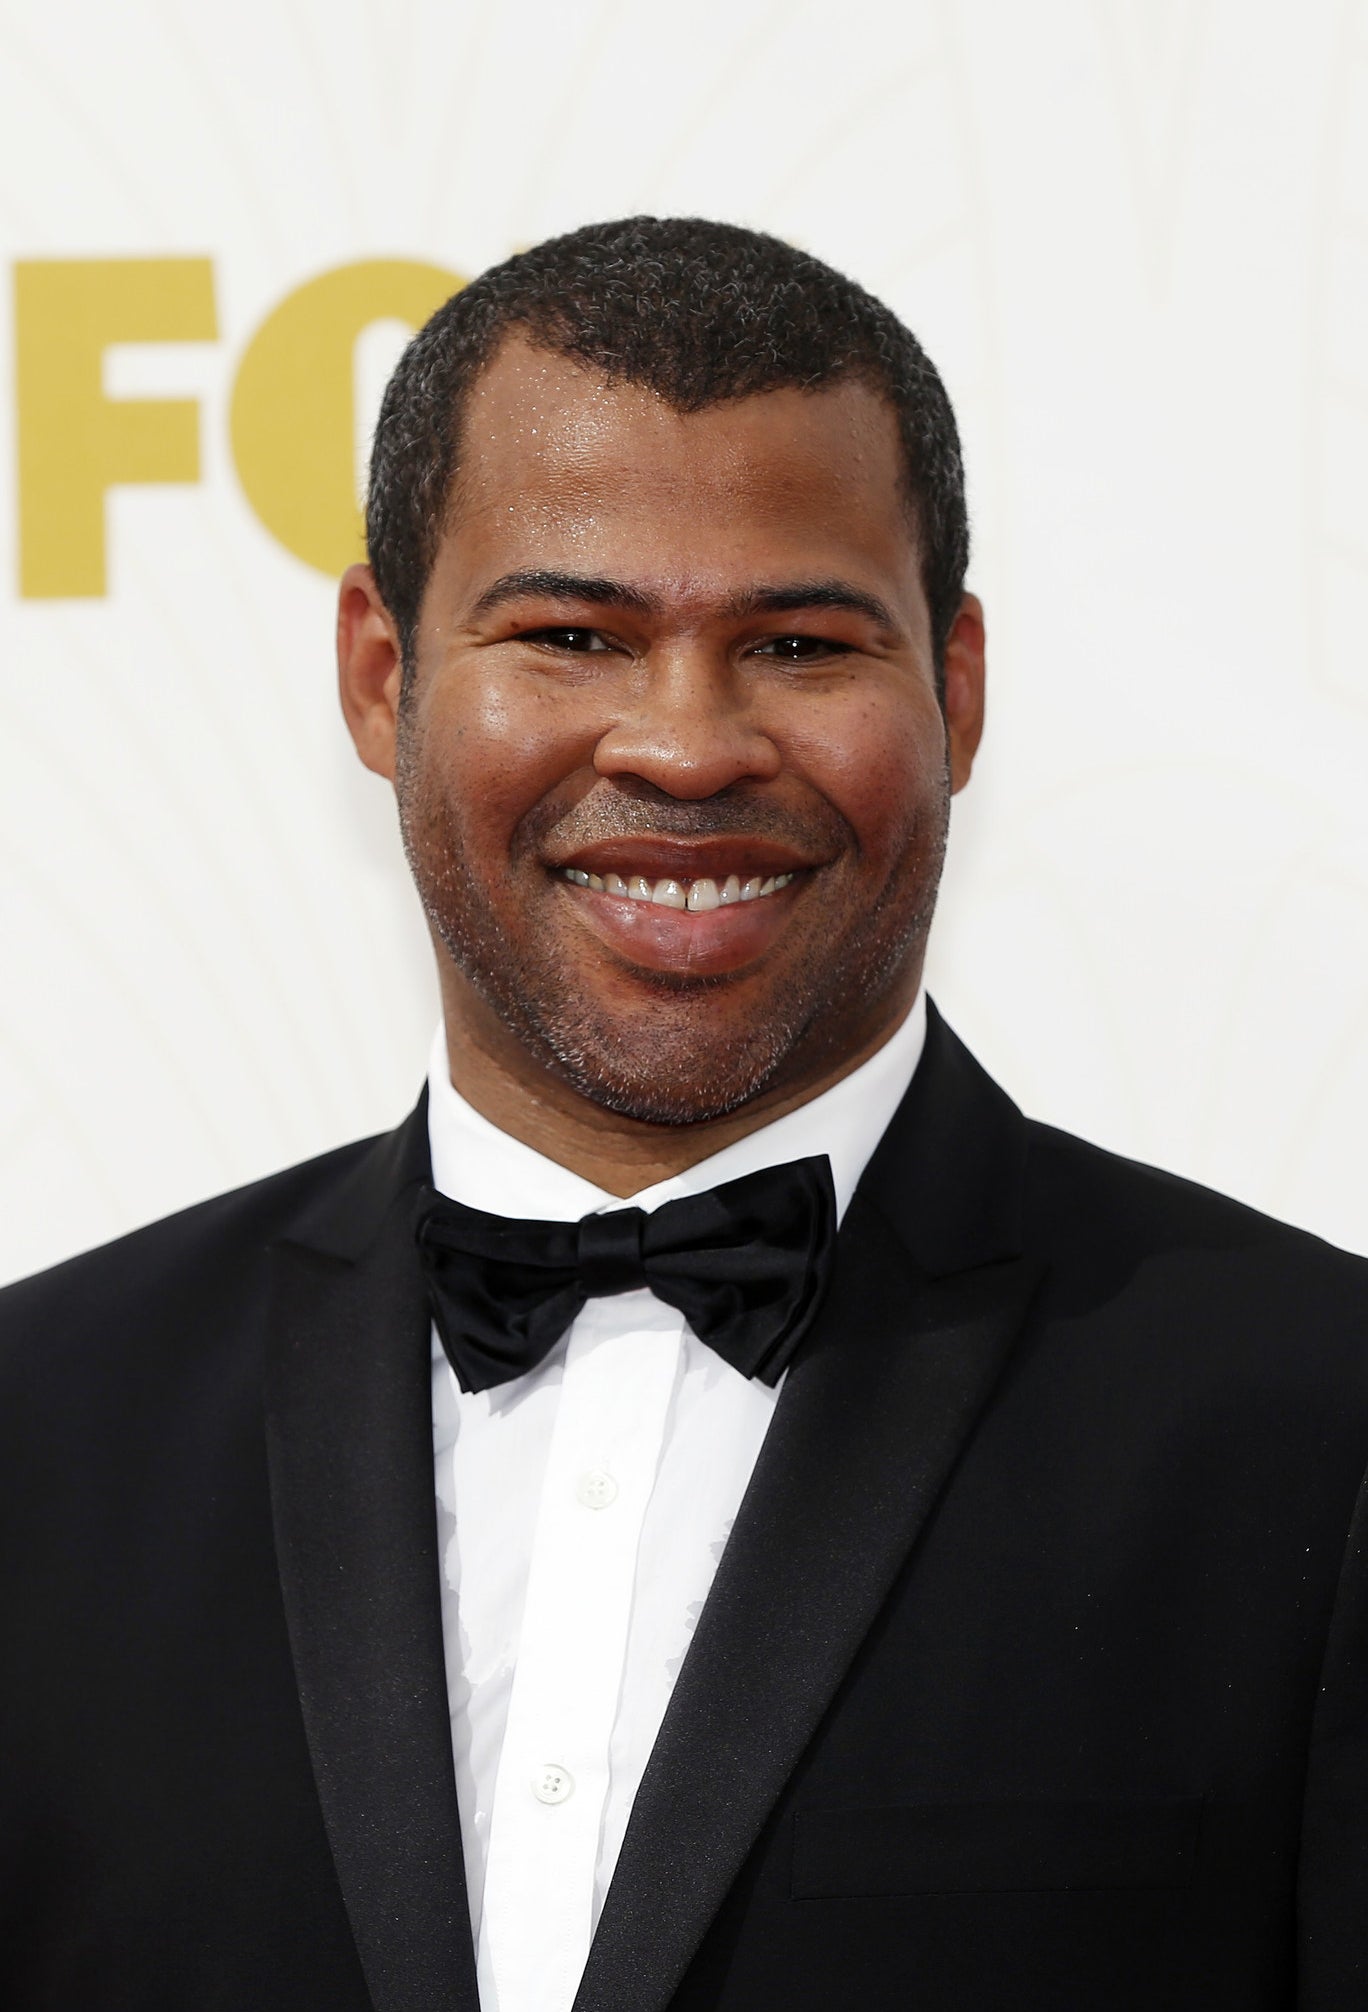 Jordan Peele smiling, wearing a black tux with a bow-tie